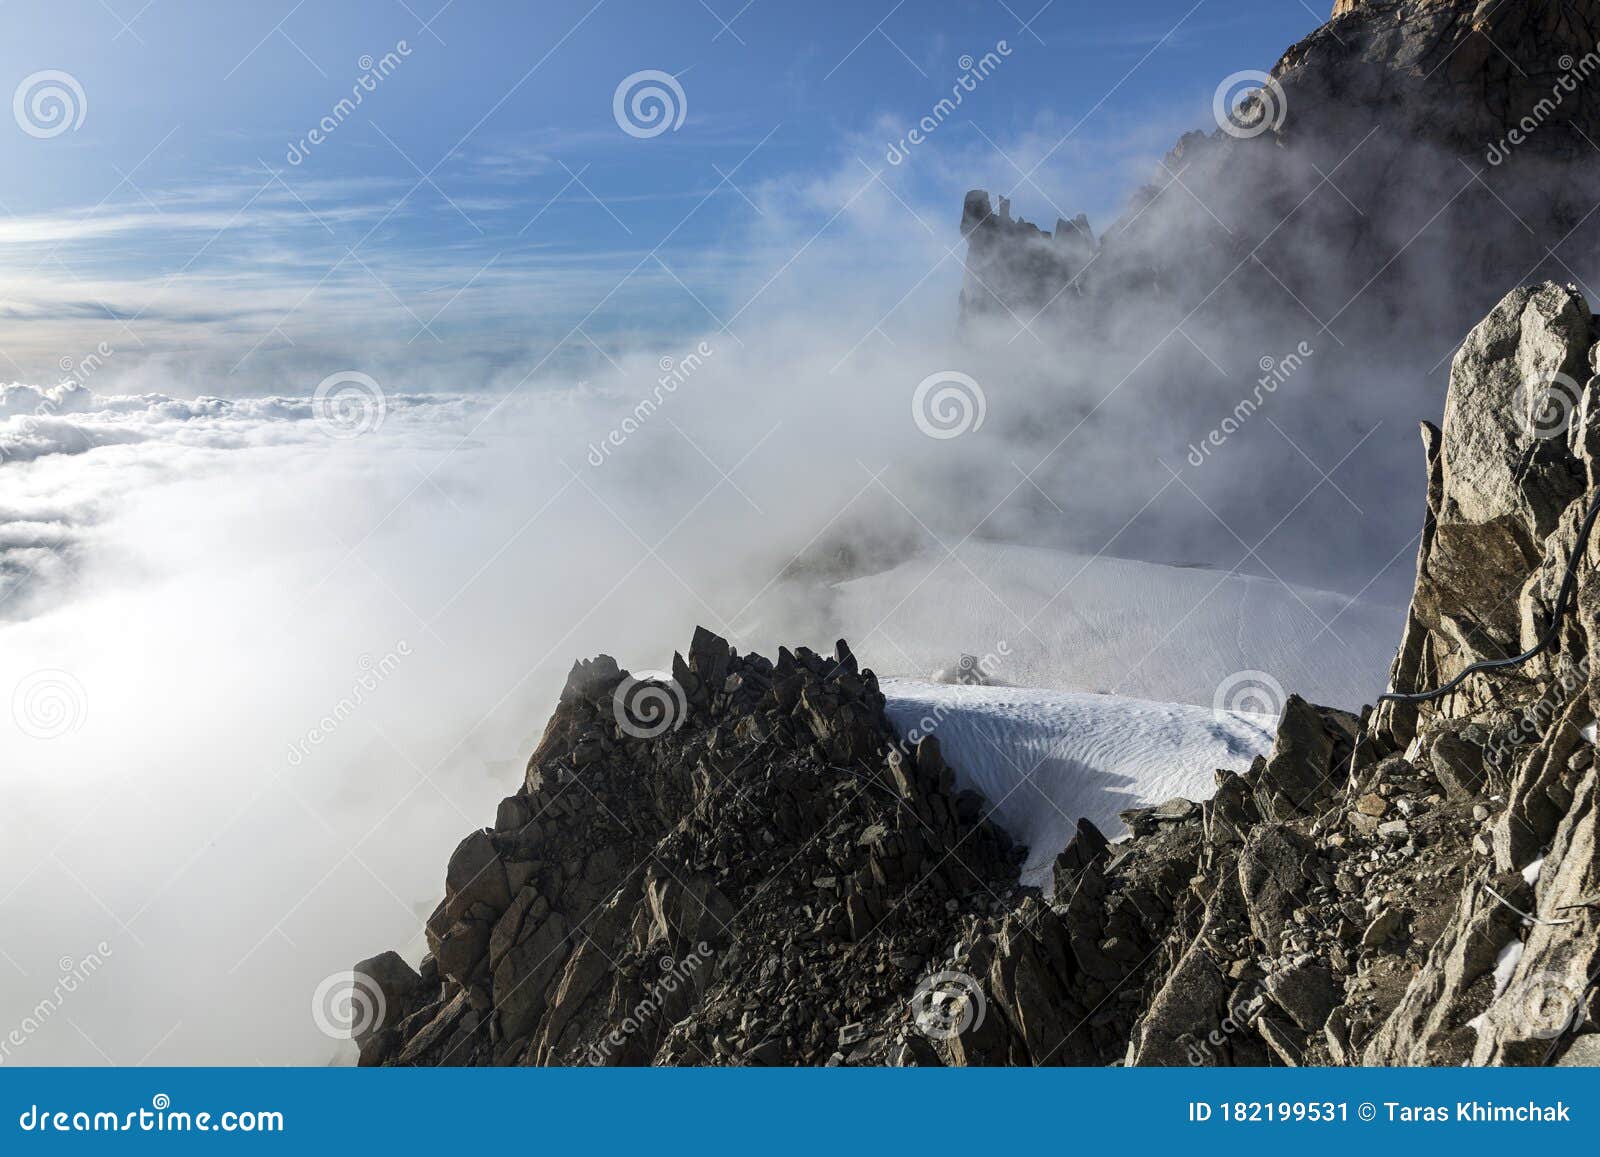 clouds and fog near aiguille du midi. view from the cosmique refuge, chamonix, france.